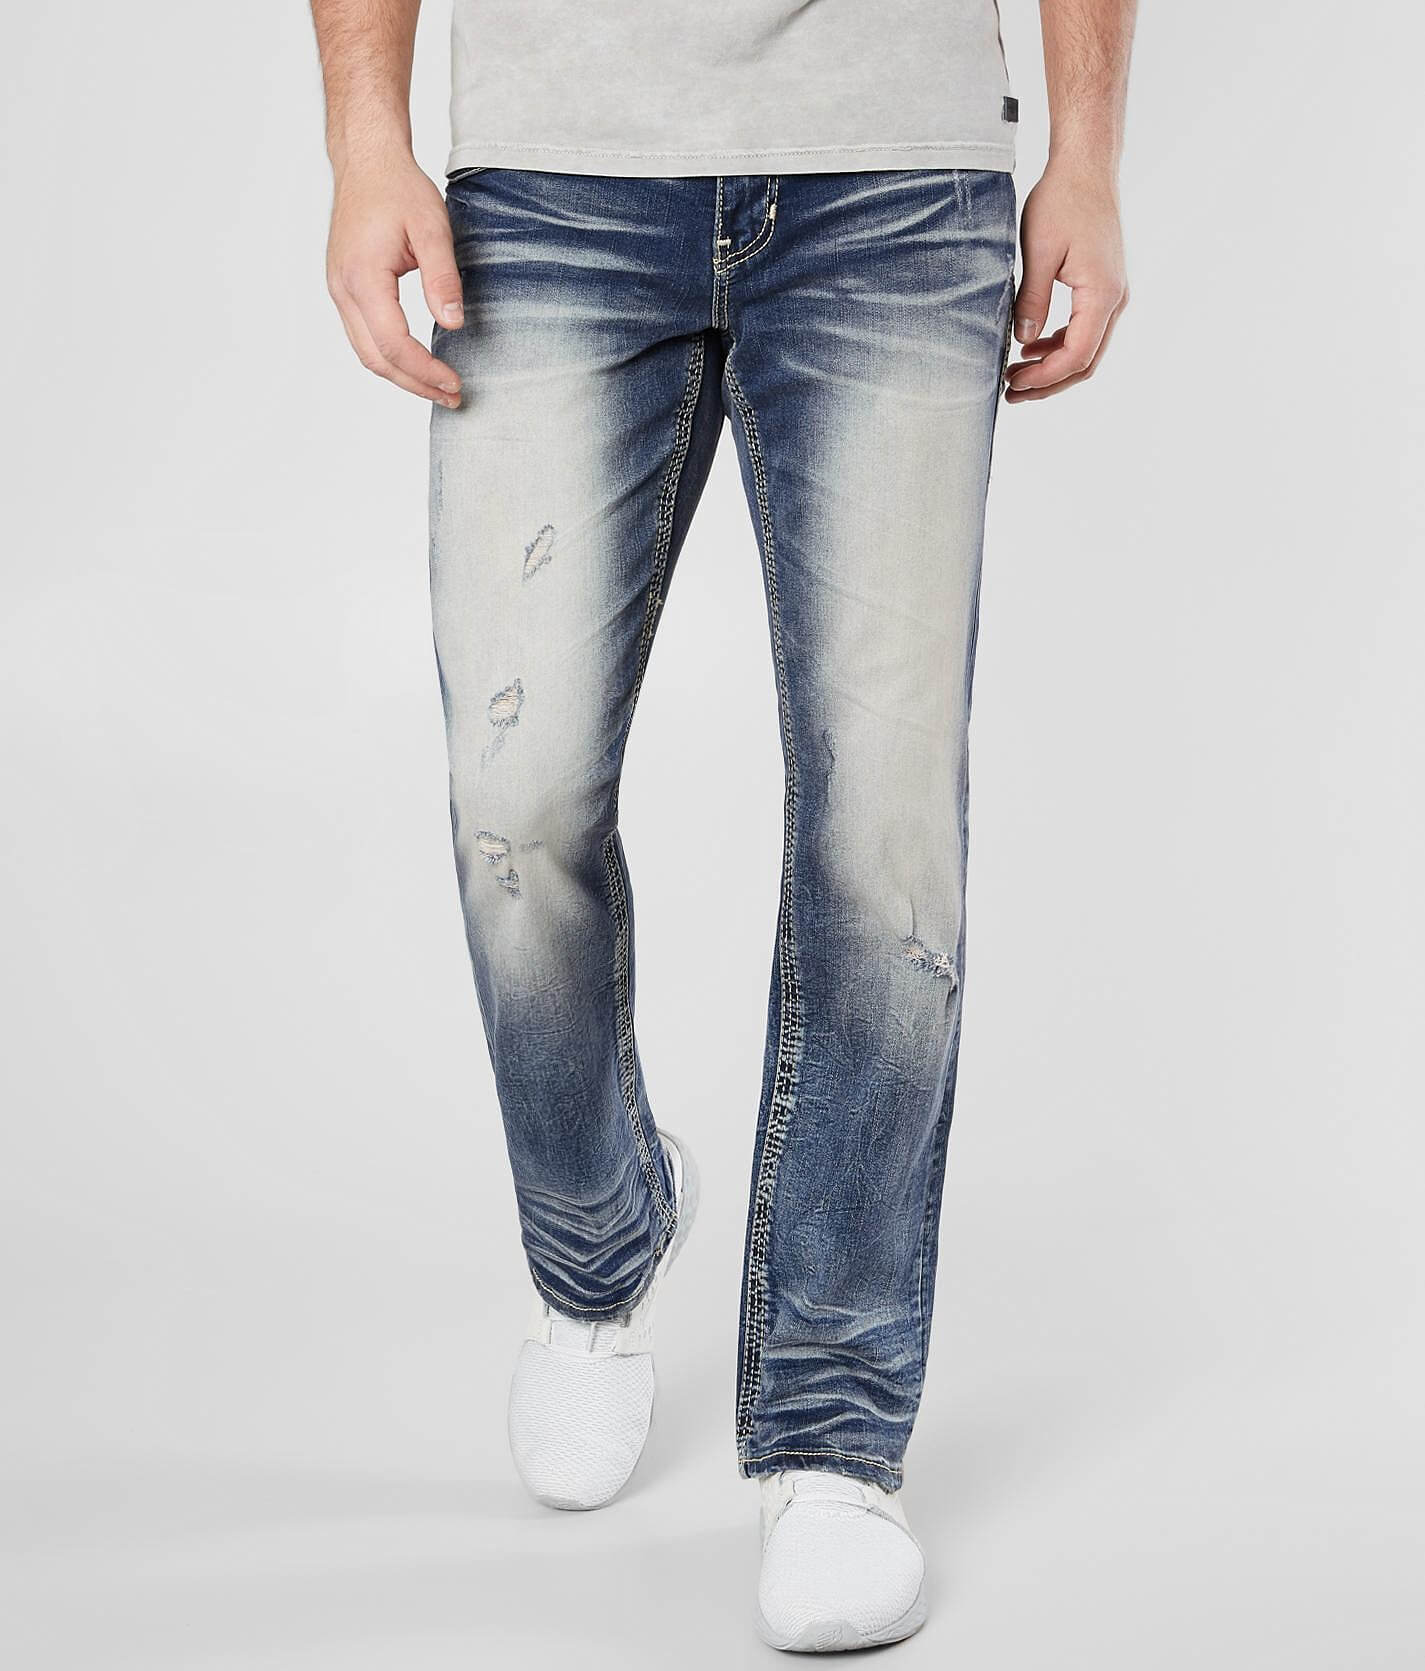 my fate jeans price